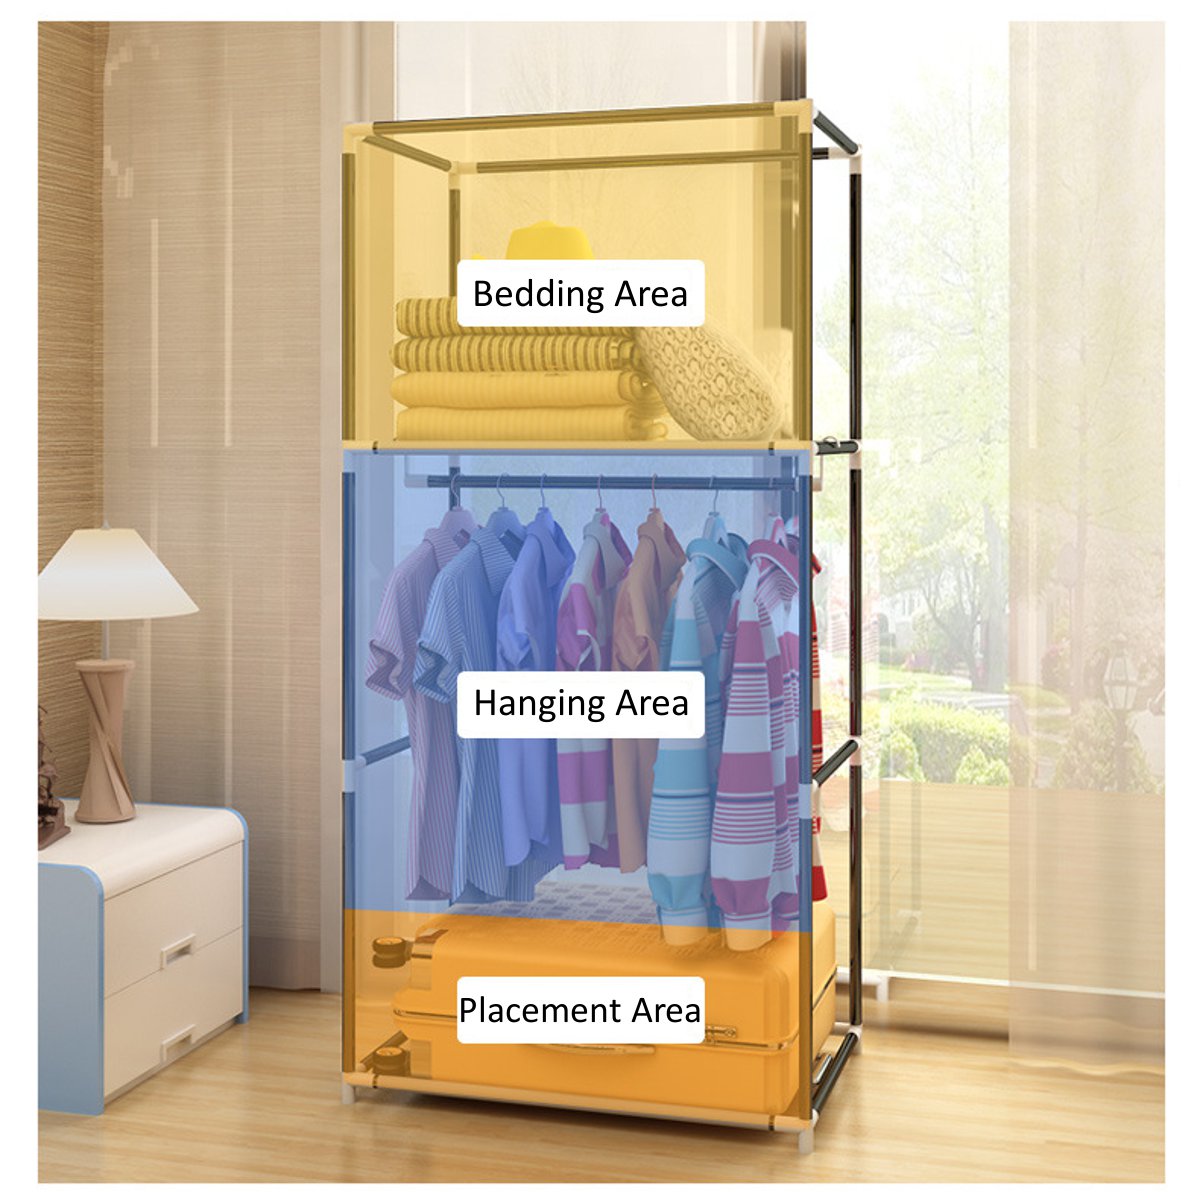 Portable Cloth Wardrobe Home Bedroom Clothes Storage Organizer Cabinet DIY Assembly Dampproof Fabric Wardrobe Closet Furniture